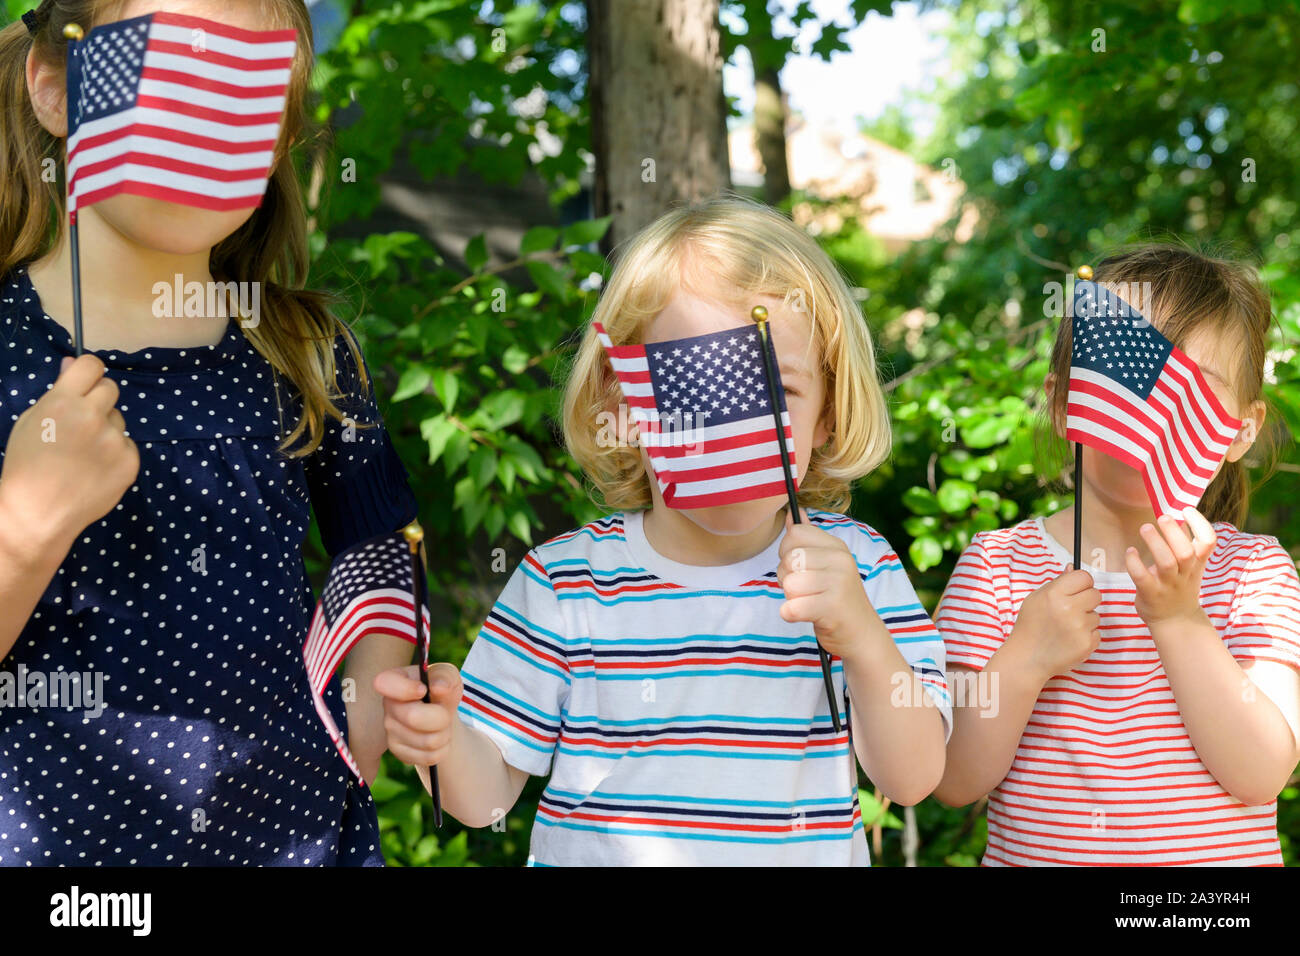 Children holding American flags over their faces Stock Photo